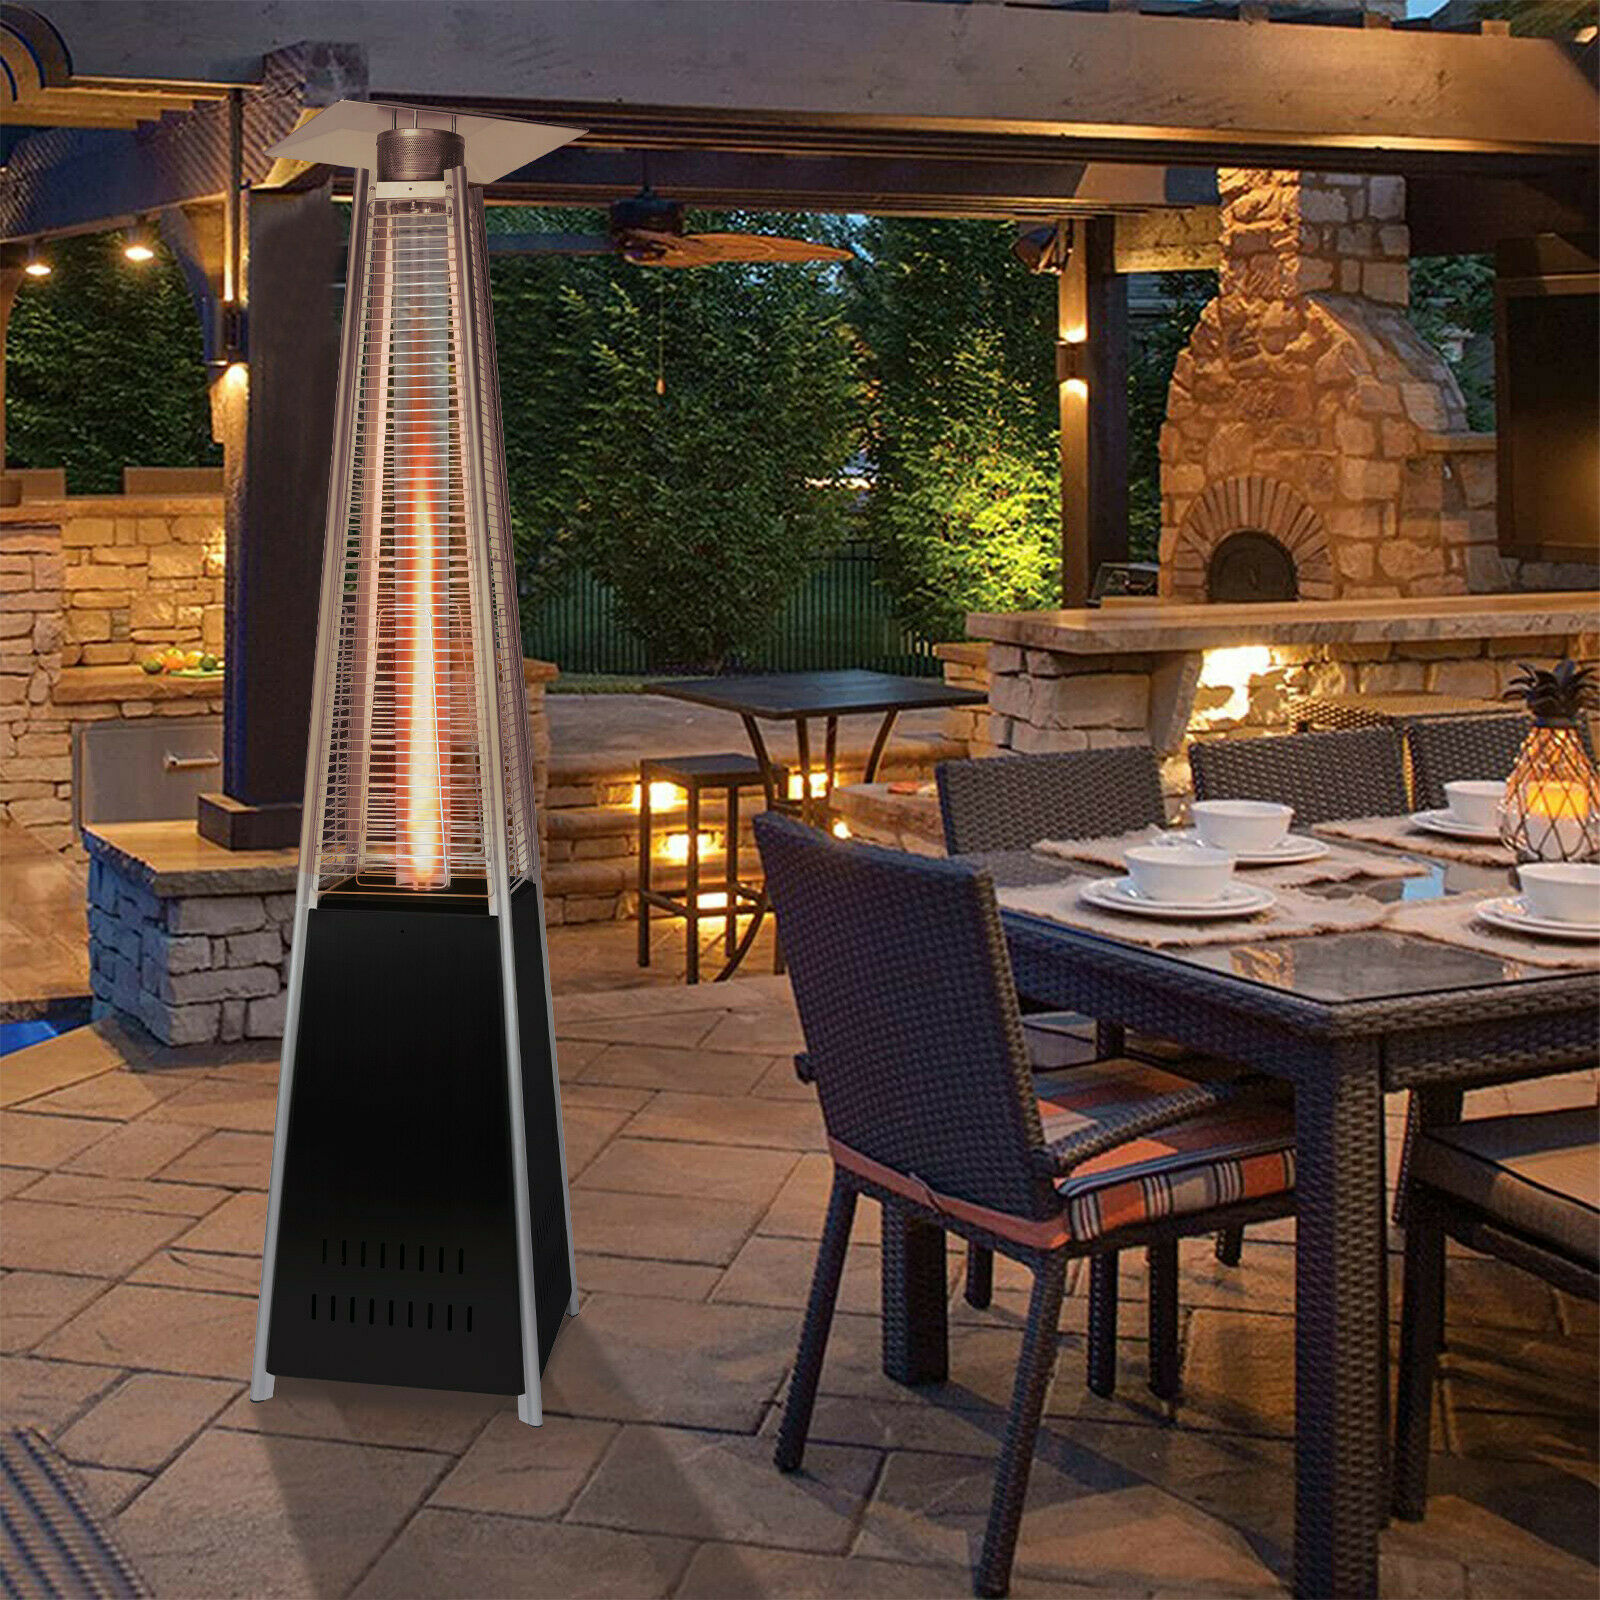 Image 1 - Patio Heater 42,000 BTU Pyramid Flame Outdoor Propane Space Heater With Covers